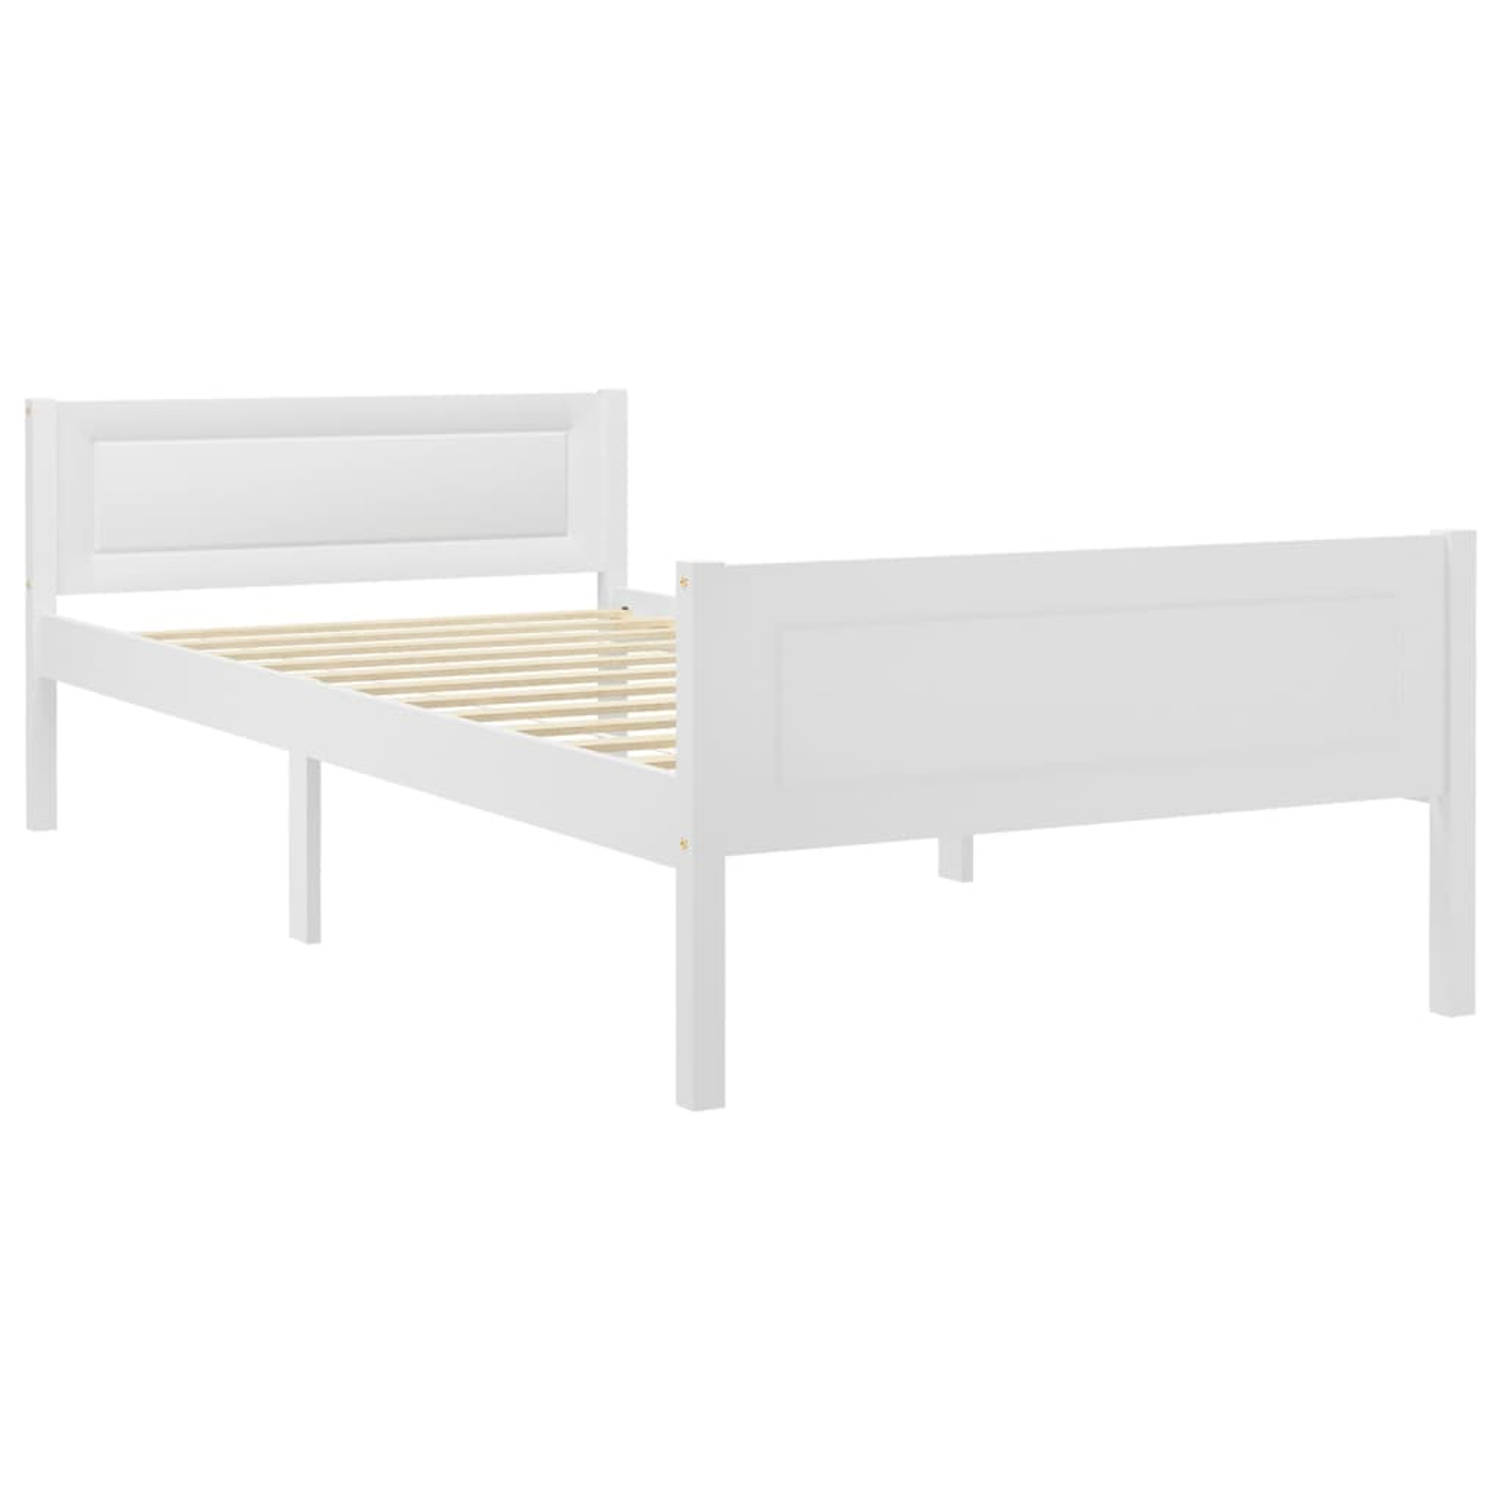 The Living Store Bedframe massief grenenhout wit 90x200 cm - Bedframe - Bedframe - Bed Frame - Bed Frames - Bed - Bedden - 1-persoonsbed - 1-persoonsbedden - Eenpersoons Bed